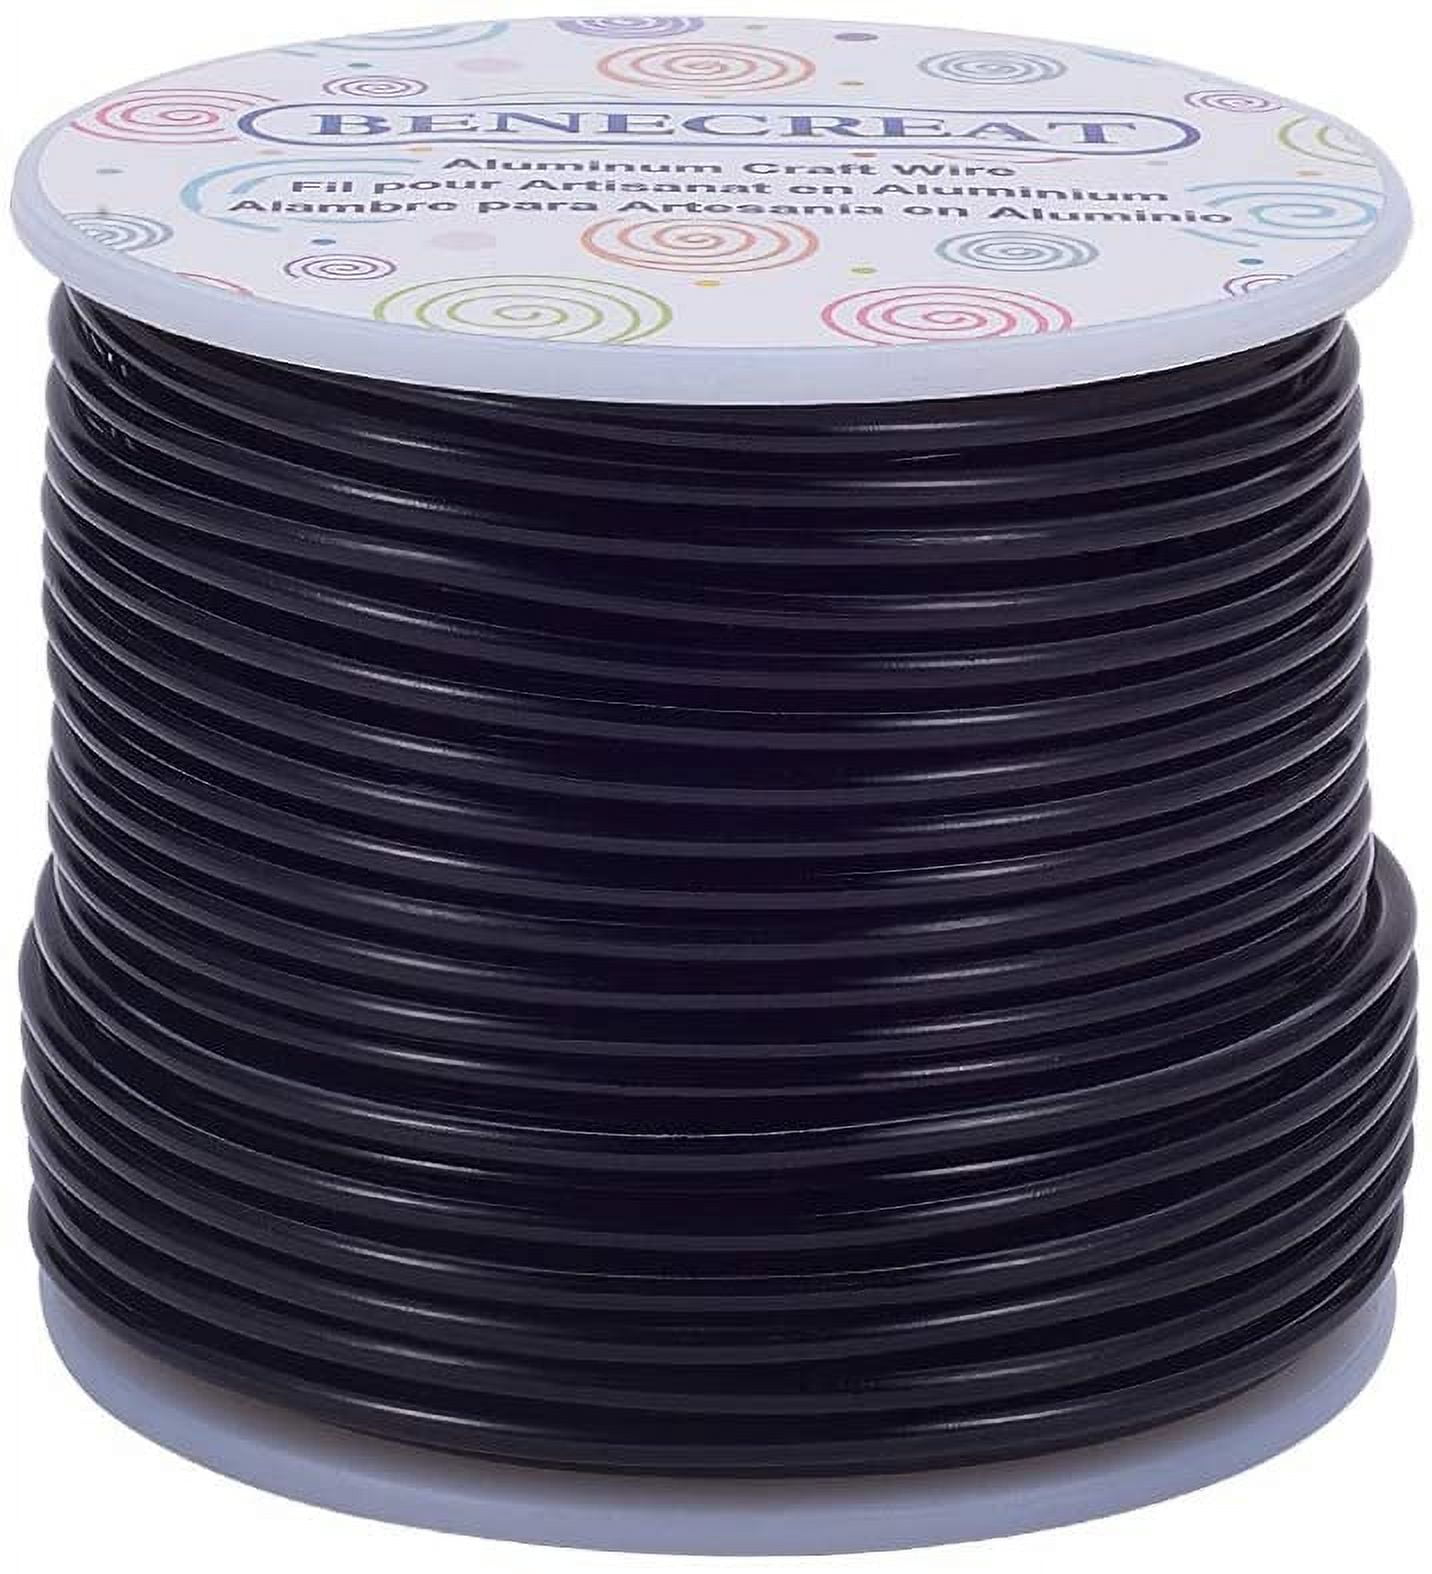 10 Gauge Jewelry Craft Aluminum Wire 80 Feet Bendable Metal Sculpting Wire  for Craft Floral Model Skeleton Making (Black 2.5mm) 